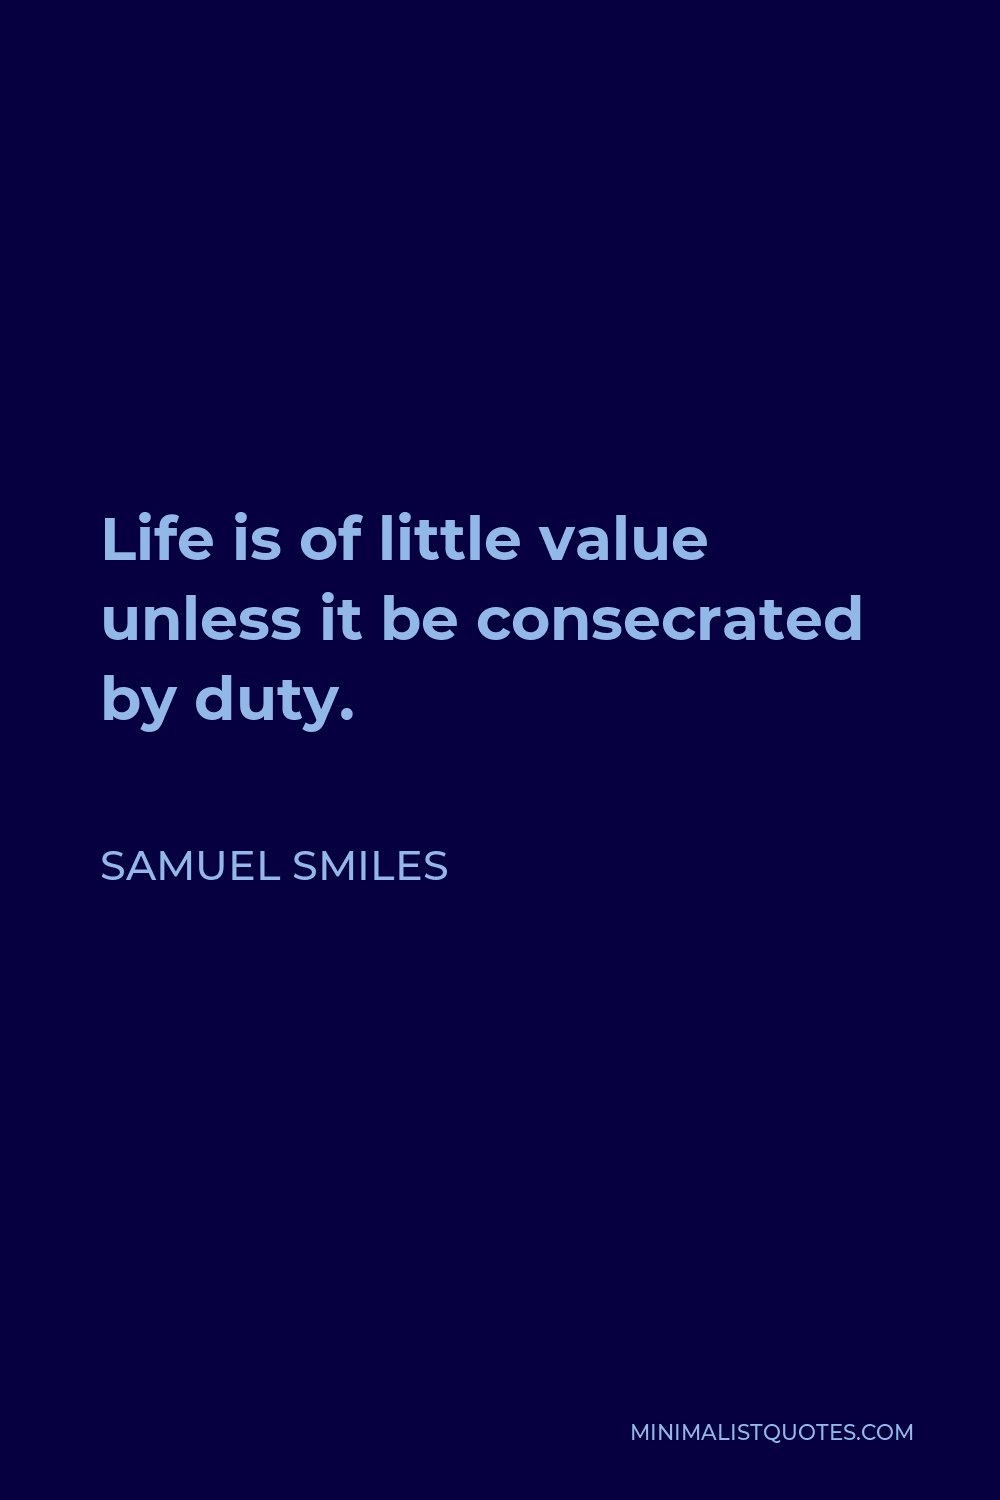 Samuel Smiles Quote - Life is of little value unless it be consecrated by duty.